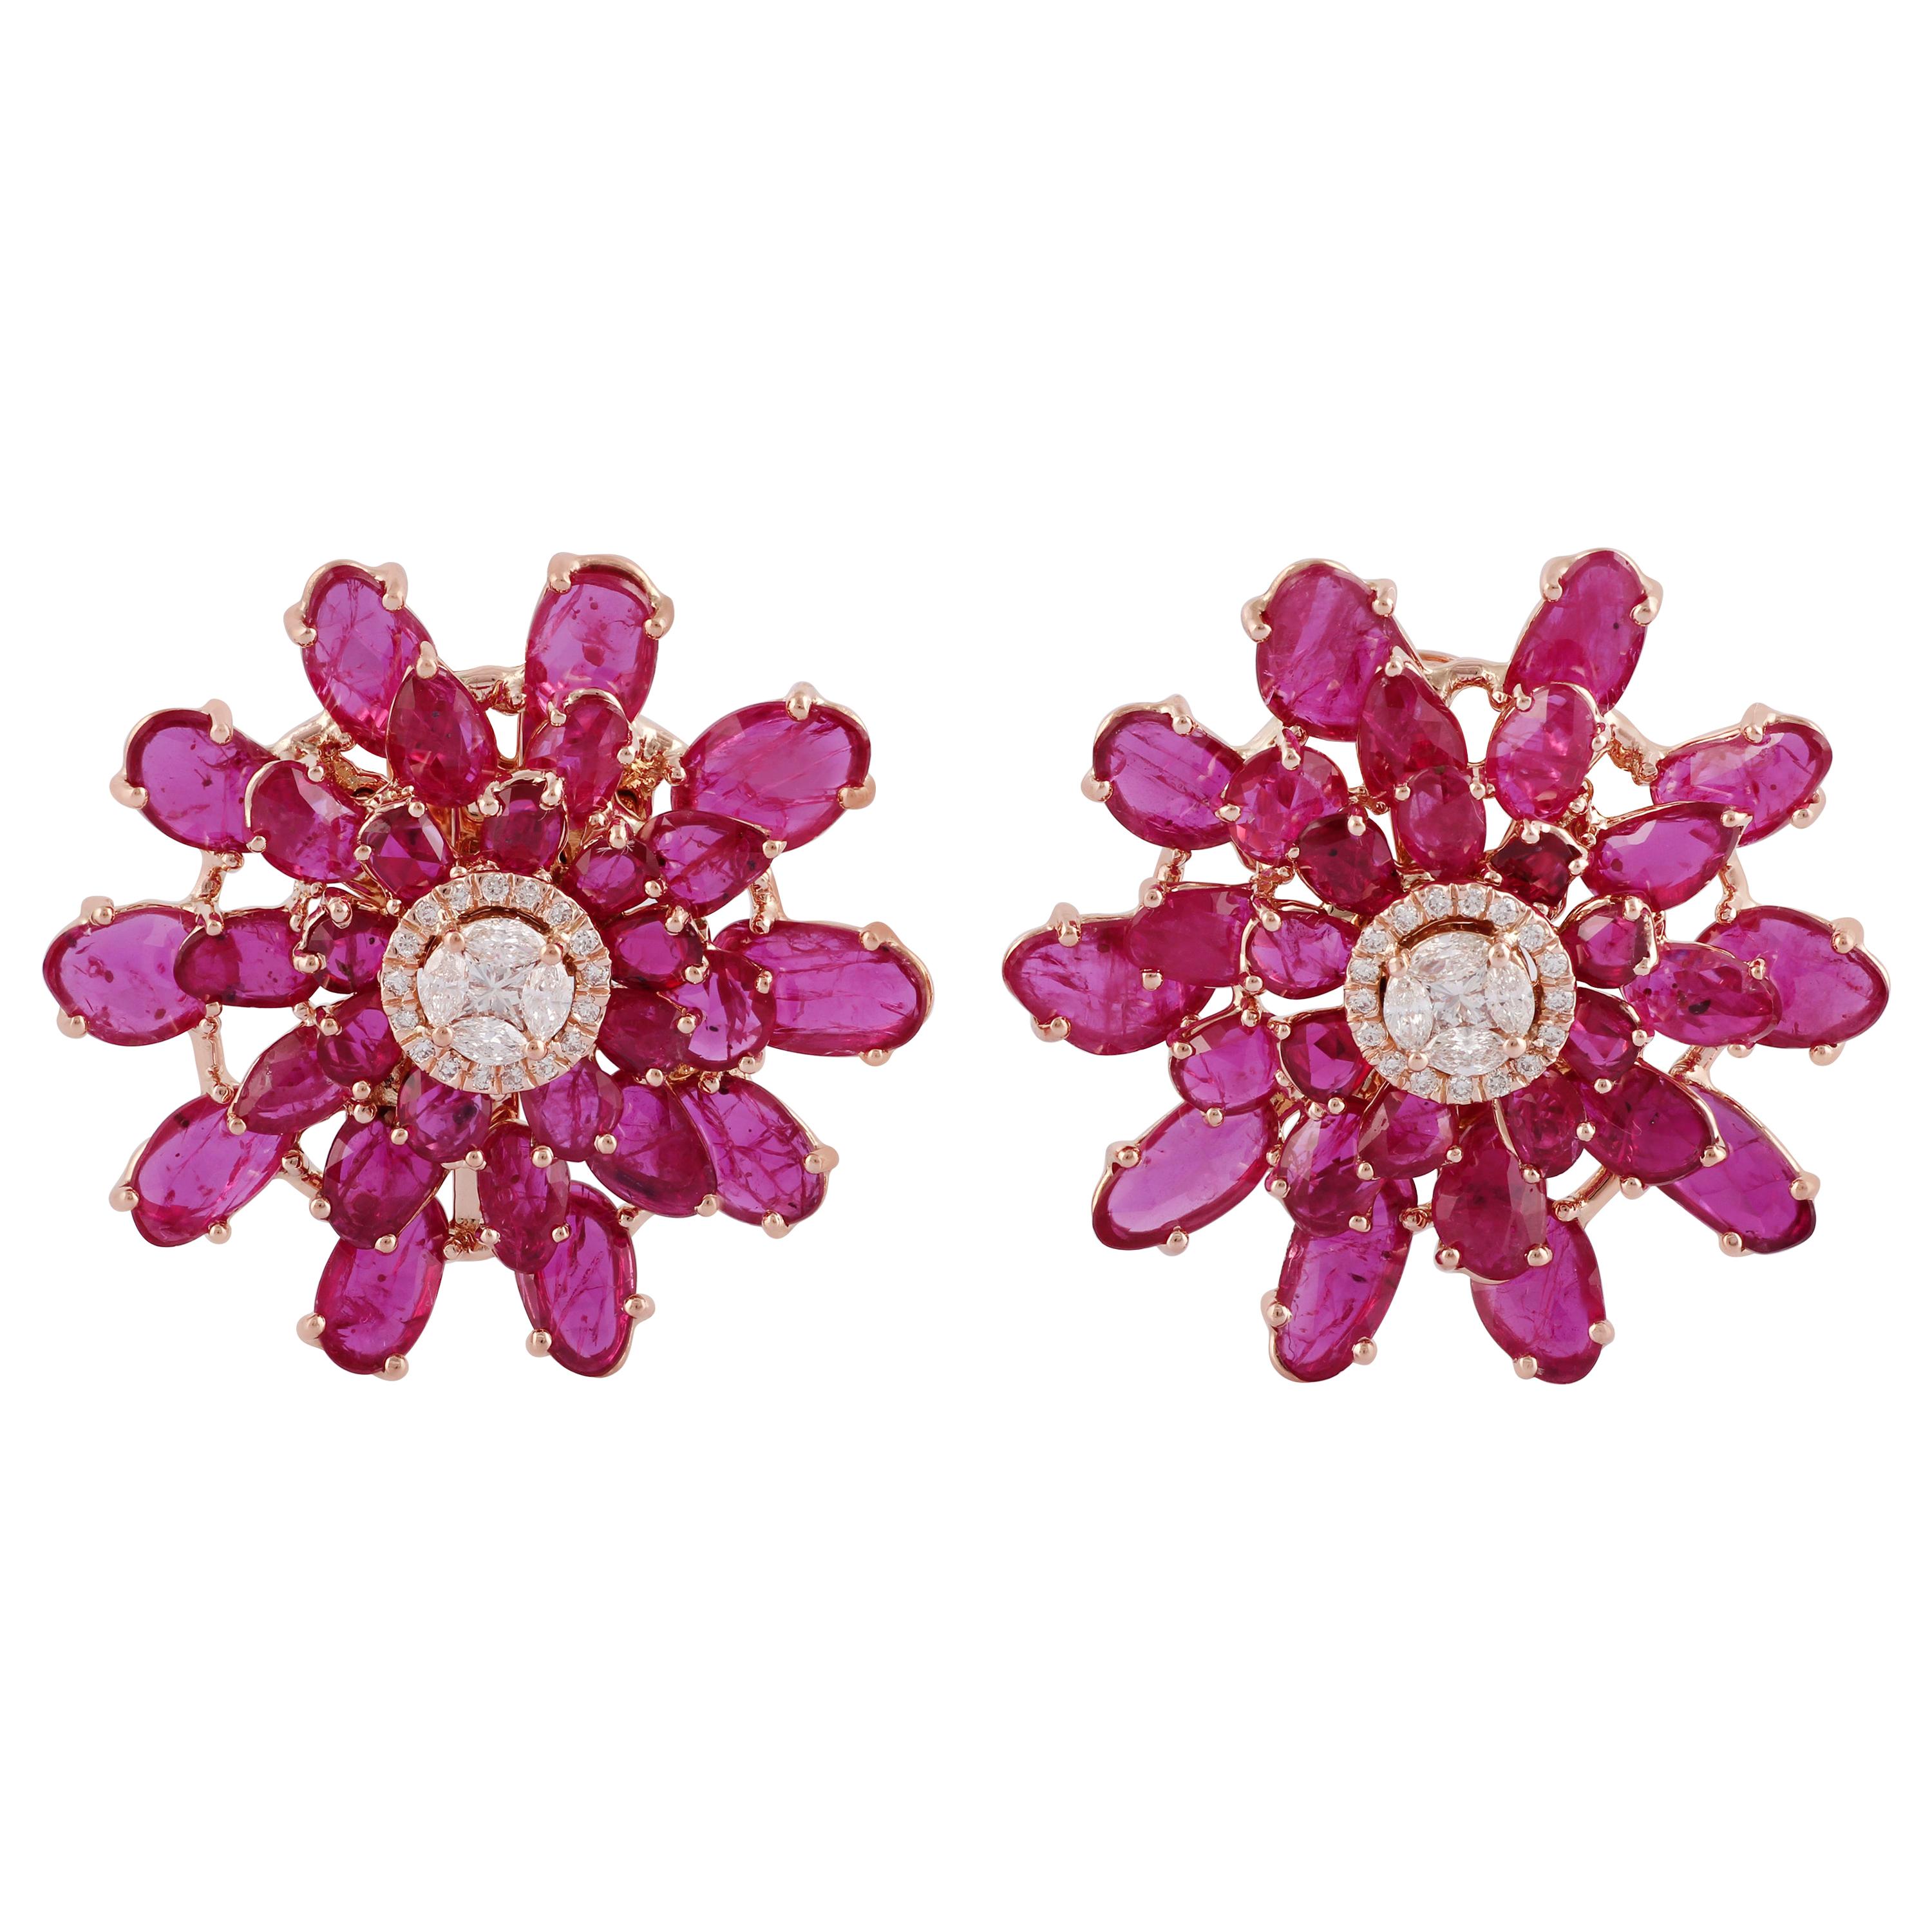 Uneven-Shaped Rose-Cut Ruby and Diamond Earrings, Set in 18 Karat Rose Gold